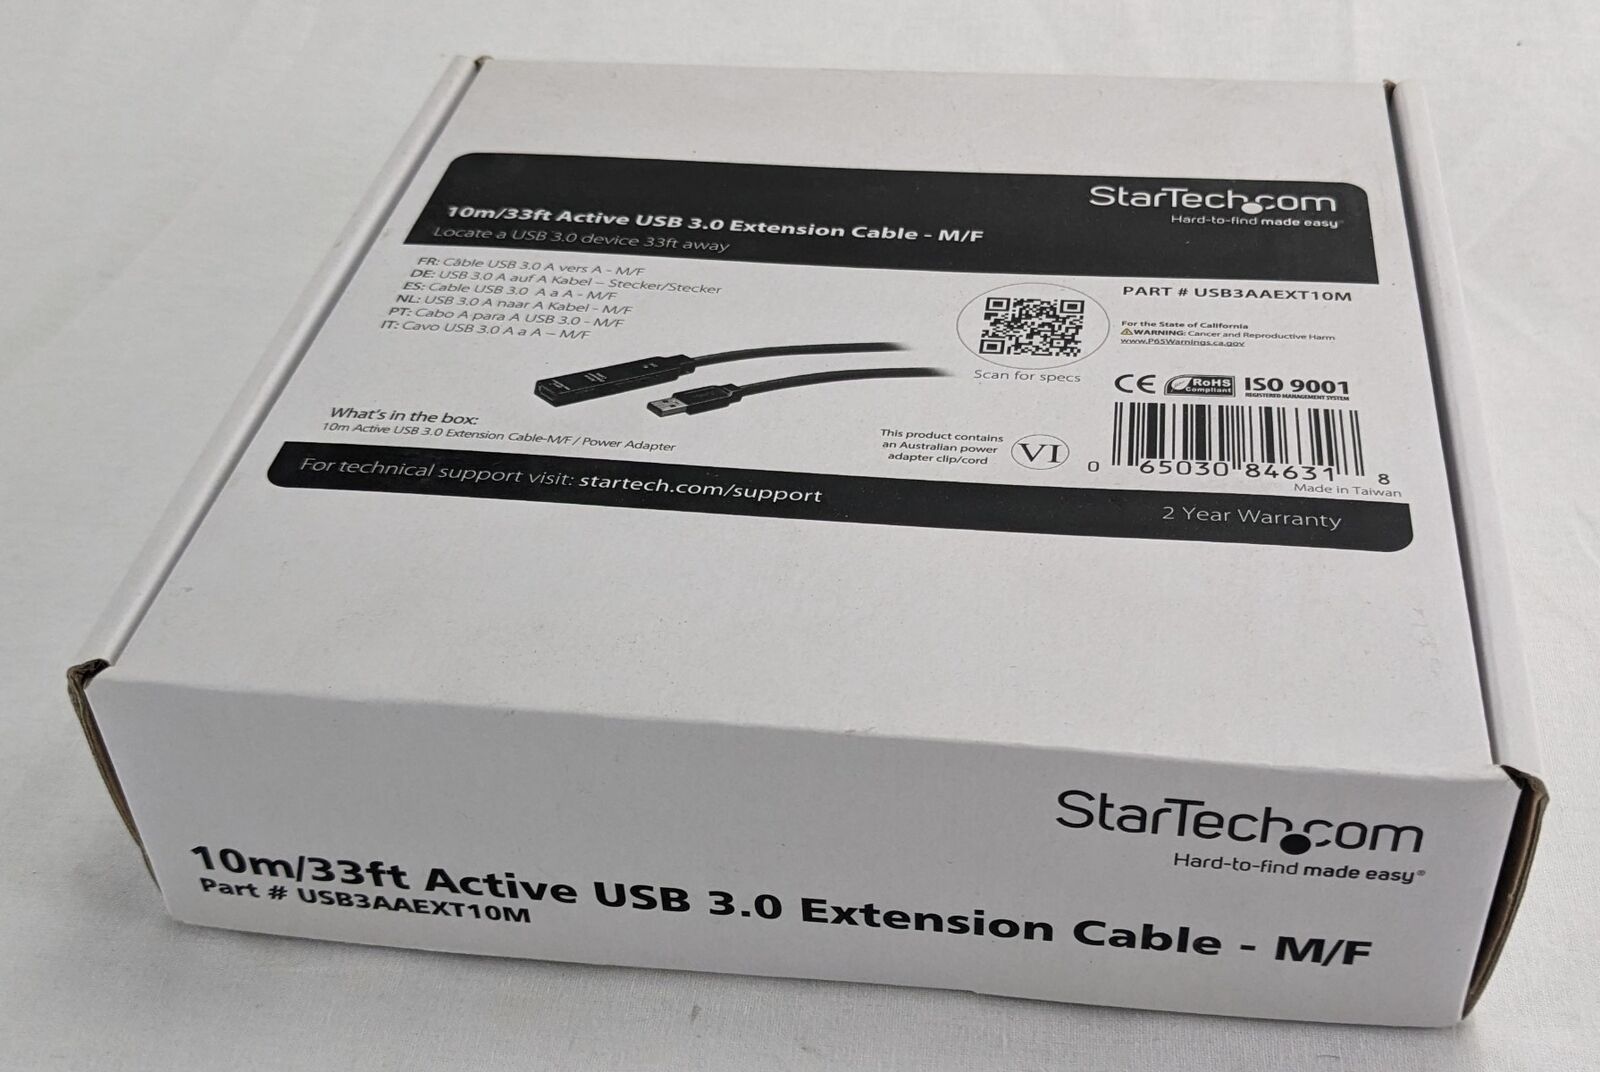 StarTech.com 33 ft Active USB 3.0 (5Gbps) Extension Cable with AC Pwr Adapter